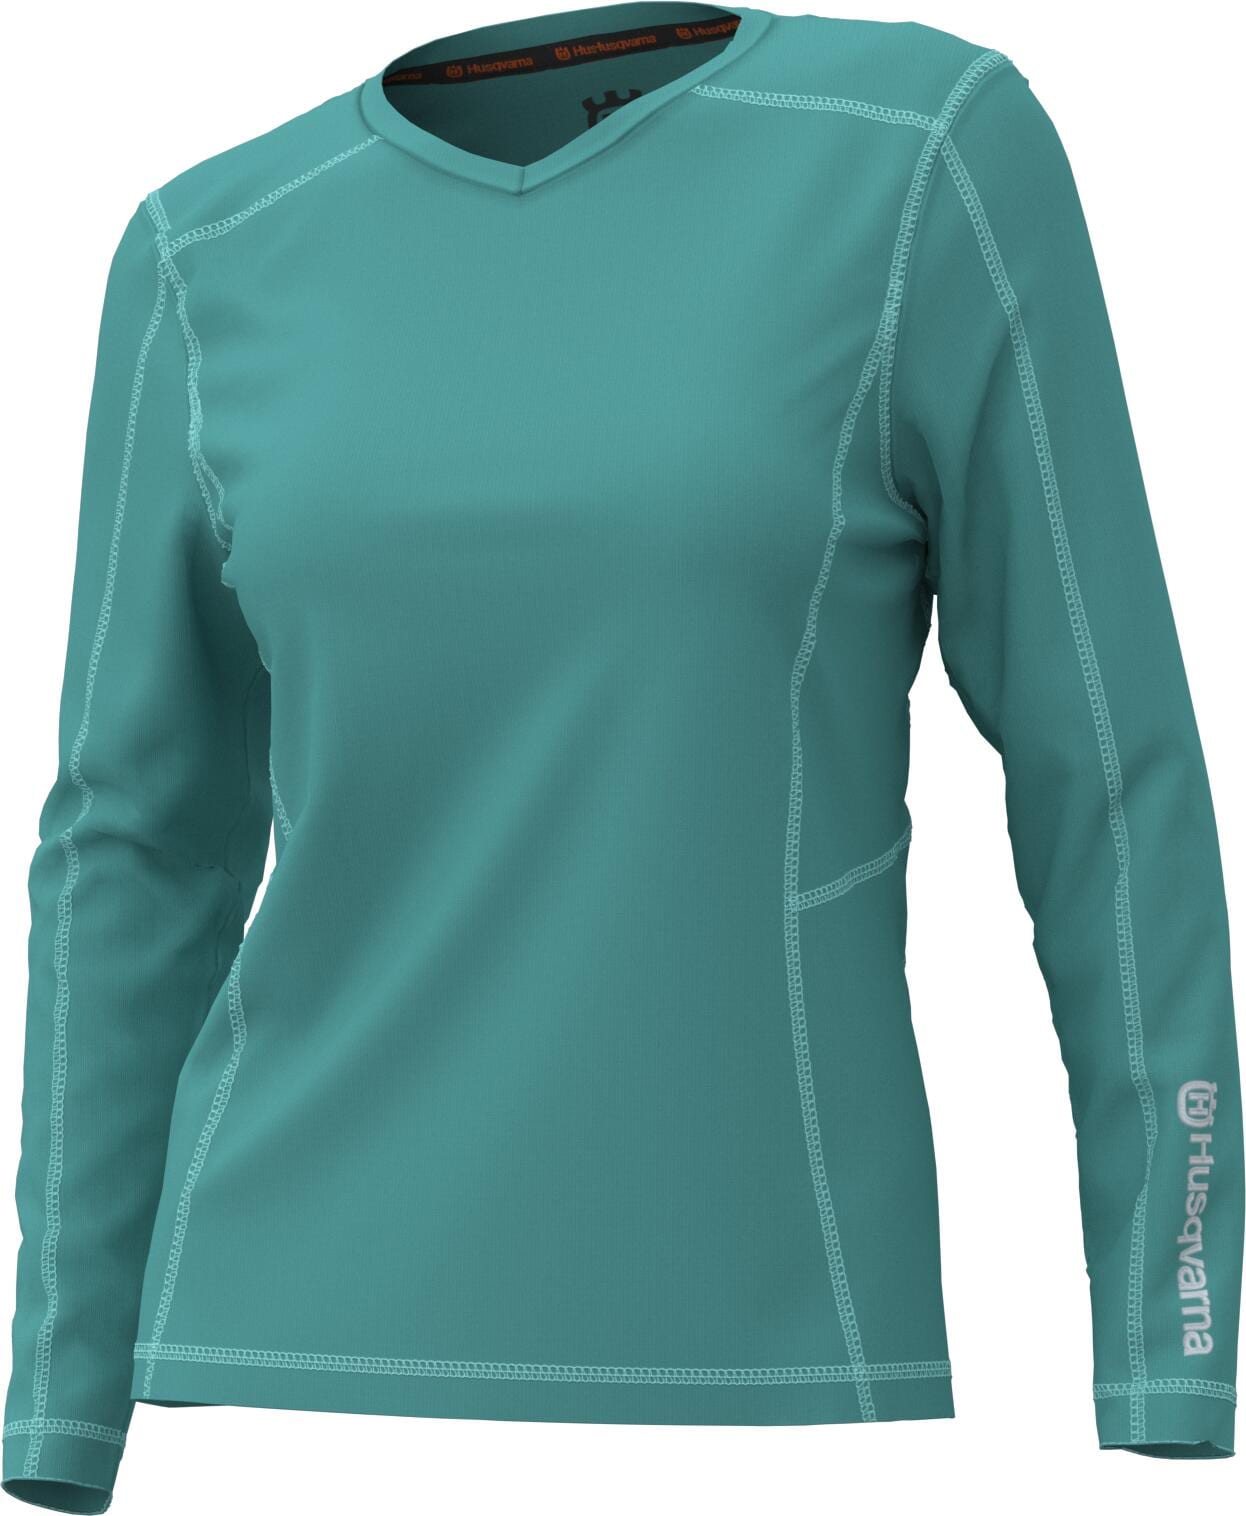 Husqvarna Women's Uv Protection sleeve Solid T-shirt Work Shirt in the Shirts department at Lowes.com